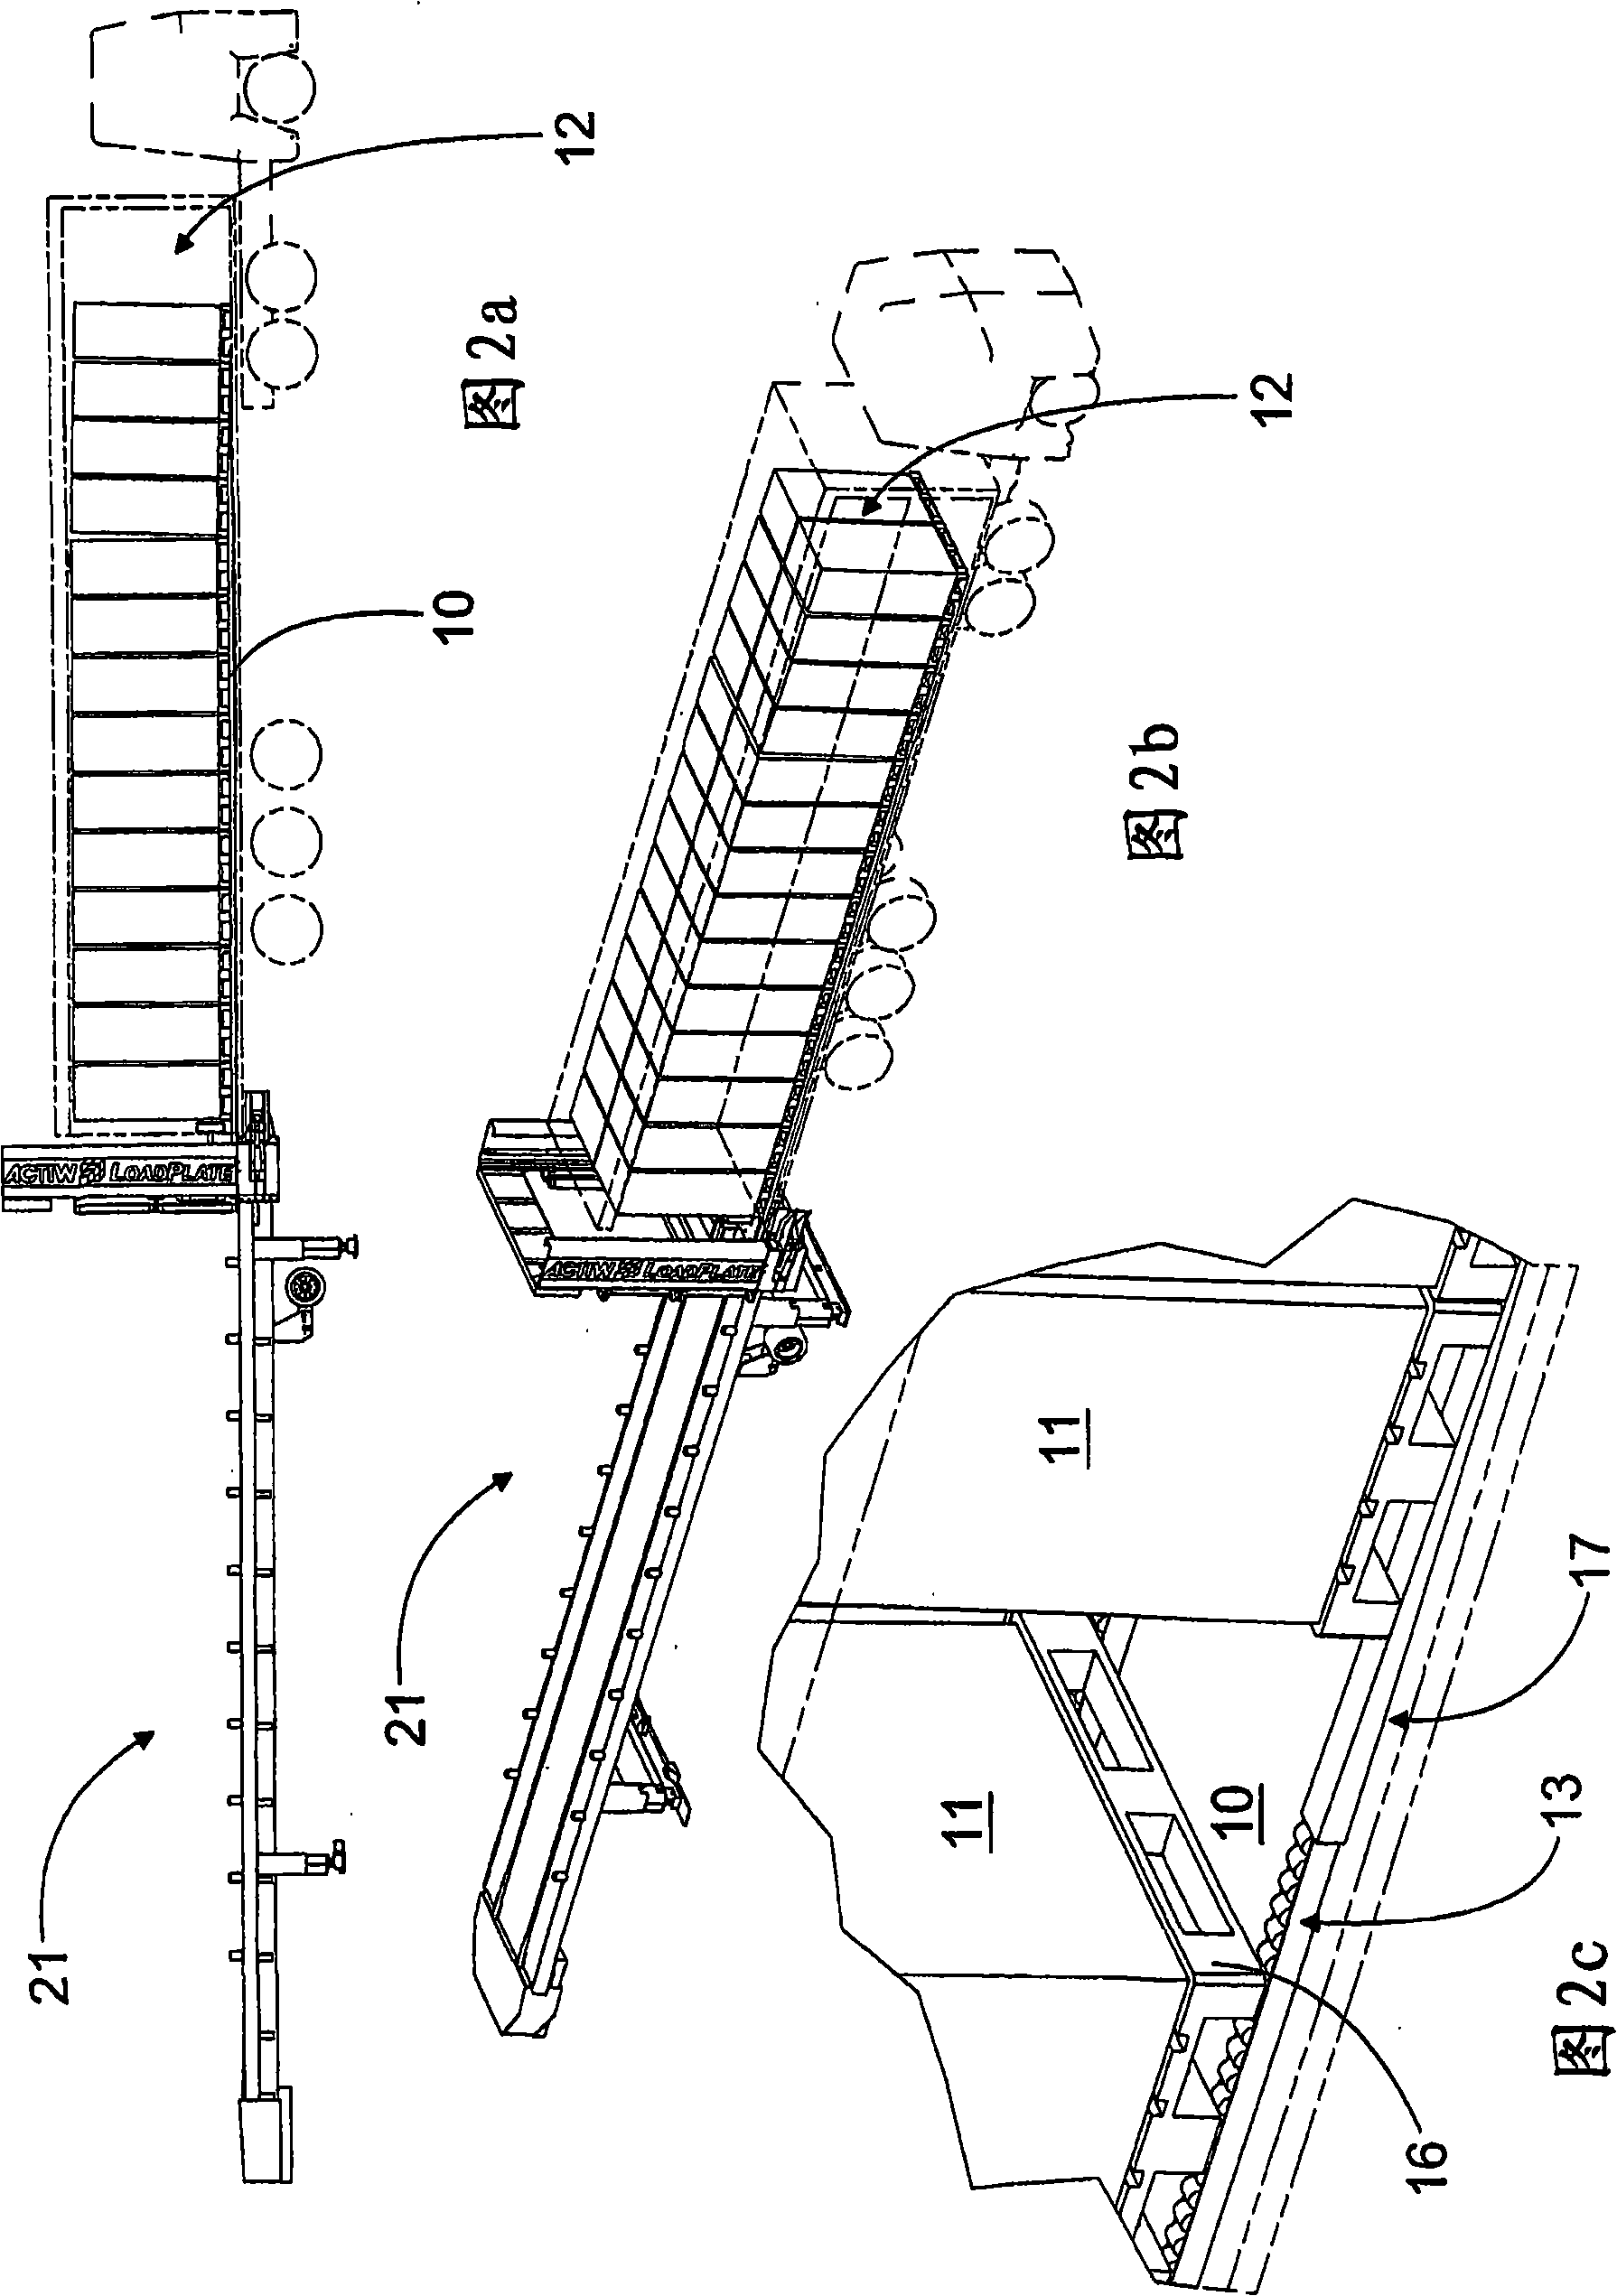 Transfer plate and method for loading a cargo space